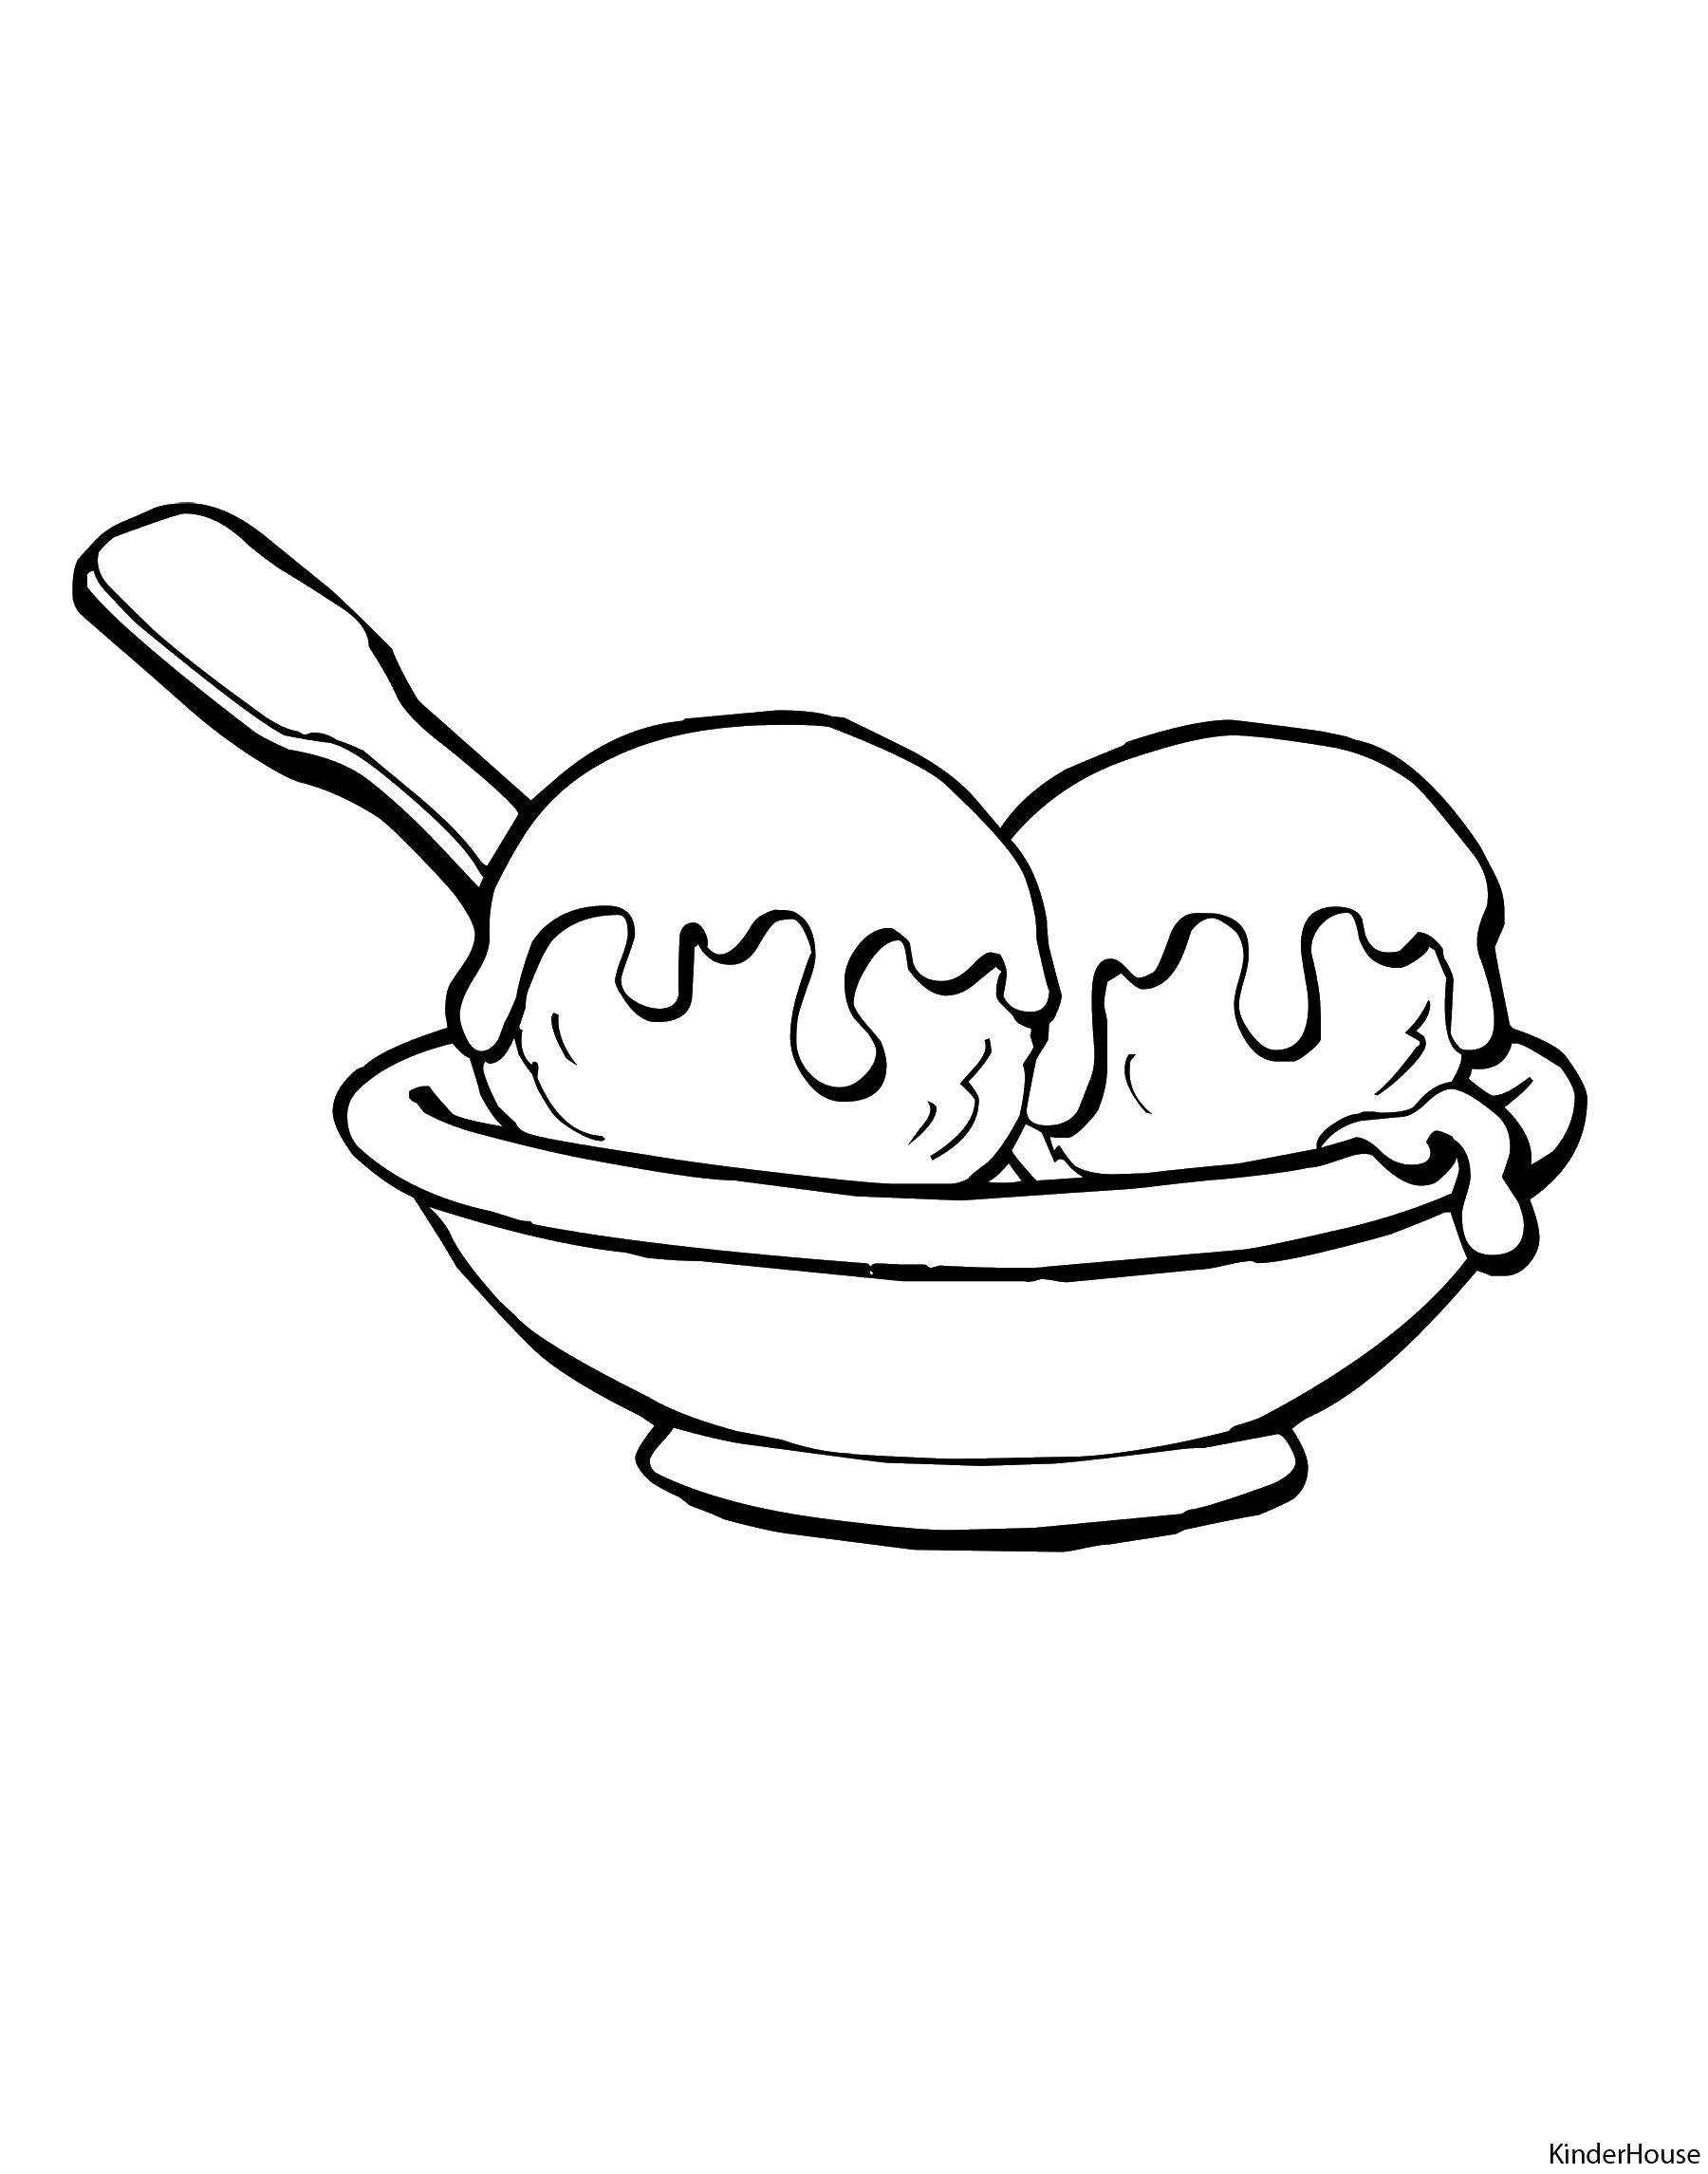 Coloring A bowl of ice cream. Category ice cream. Tags:  ice cream Cup, spoon.